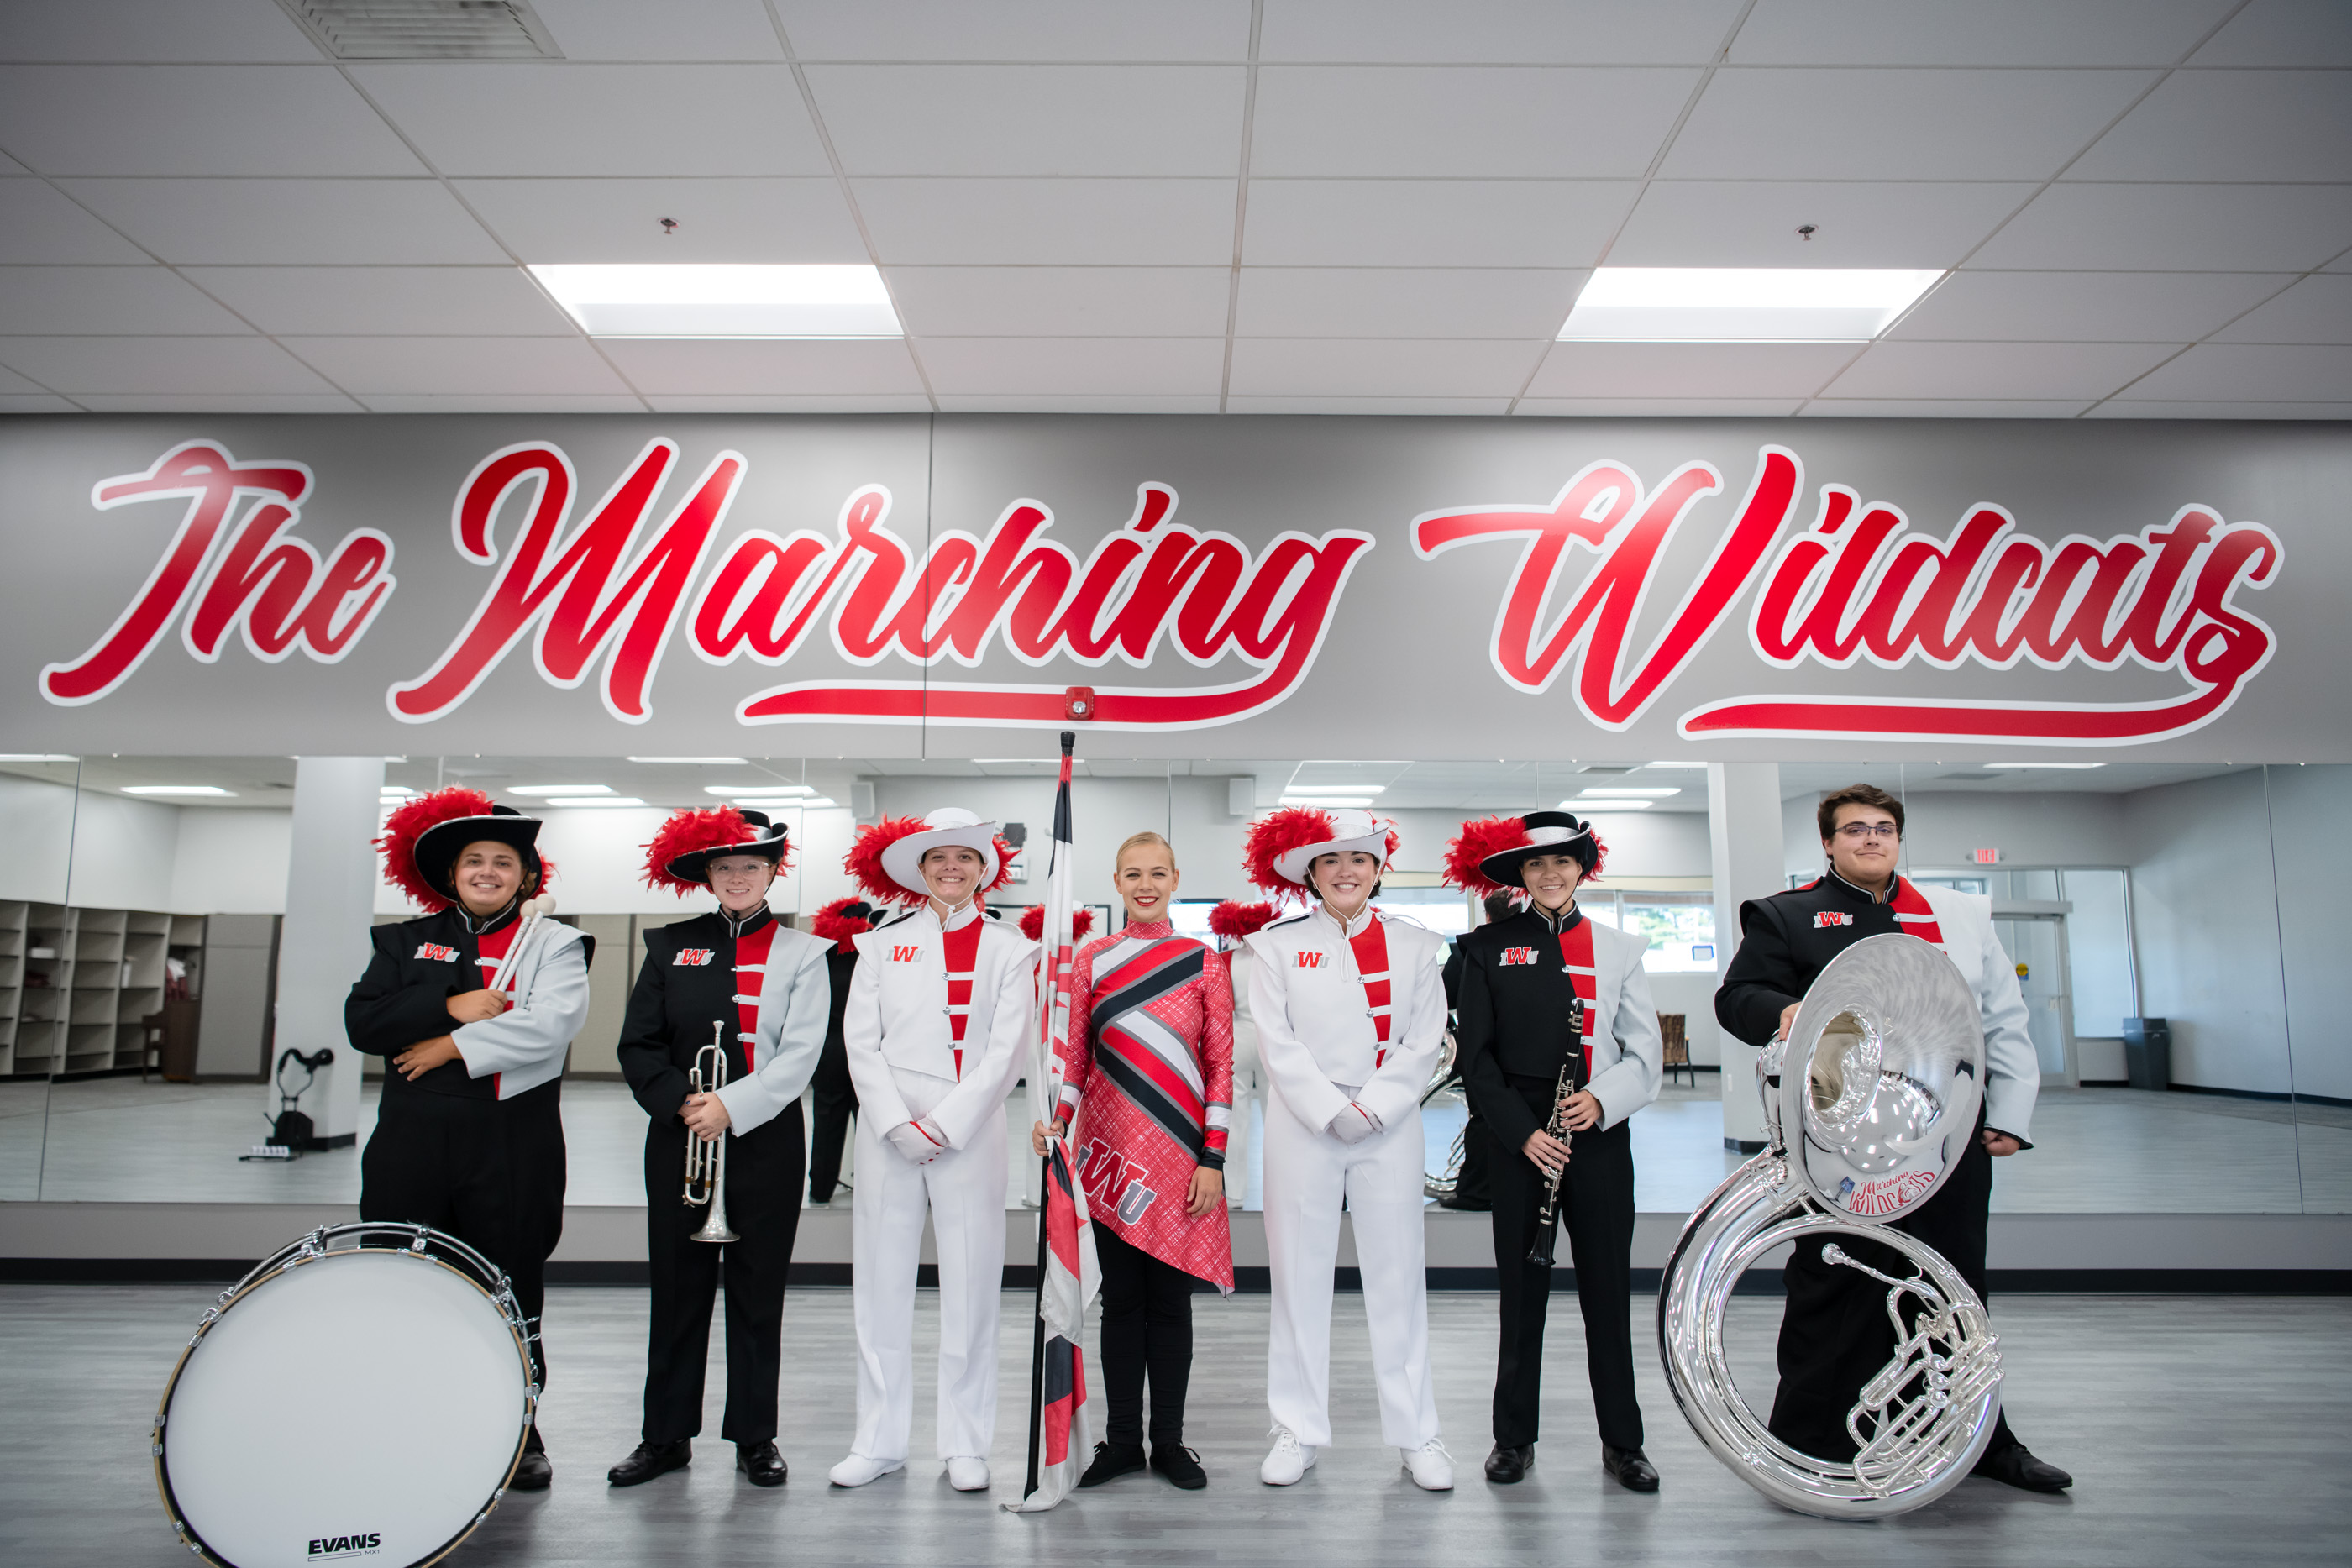 Maching Wildcats inside the Marching Band Practice Facilities